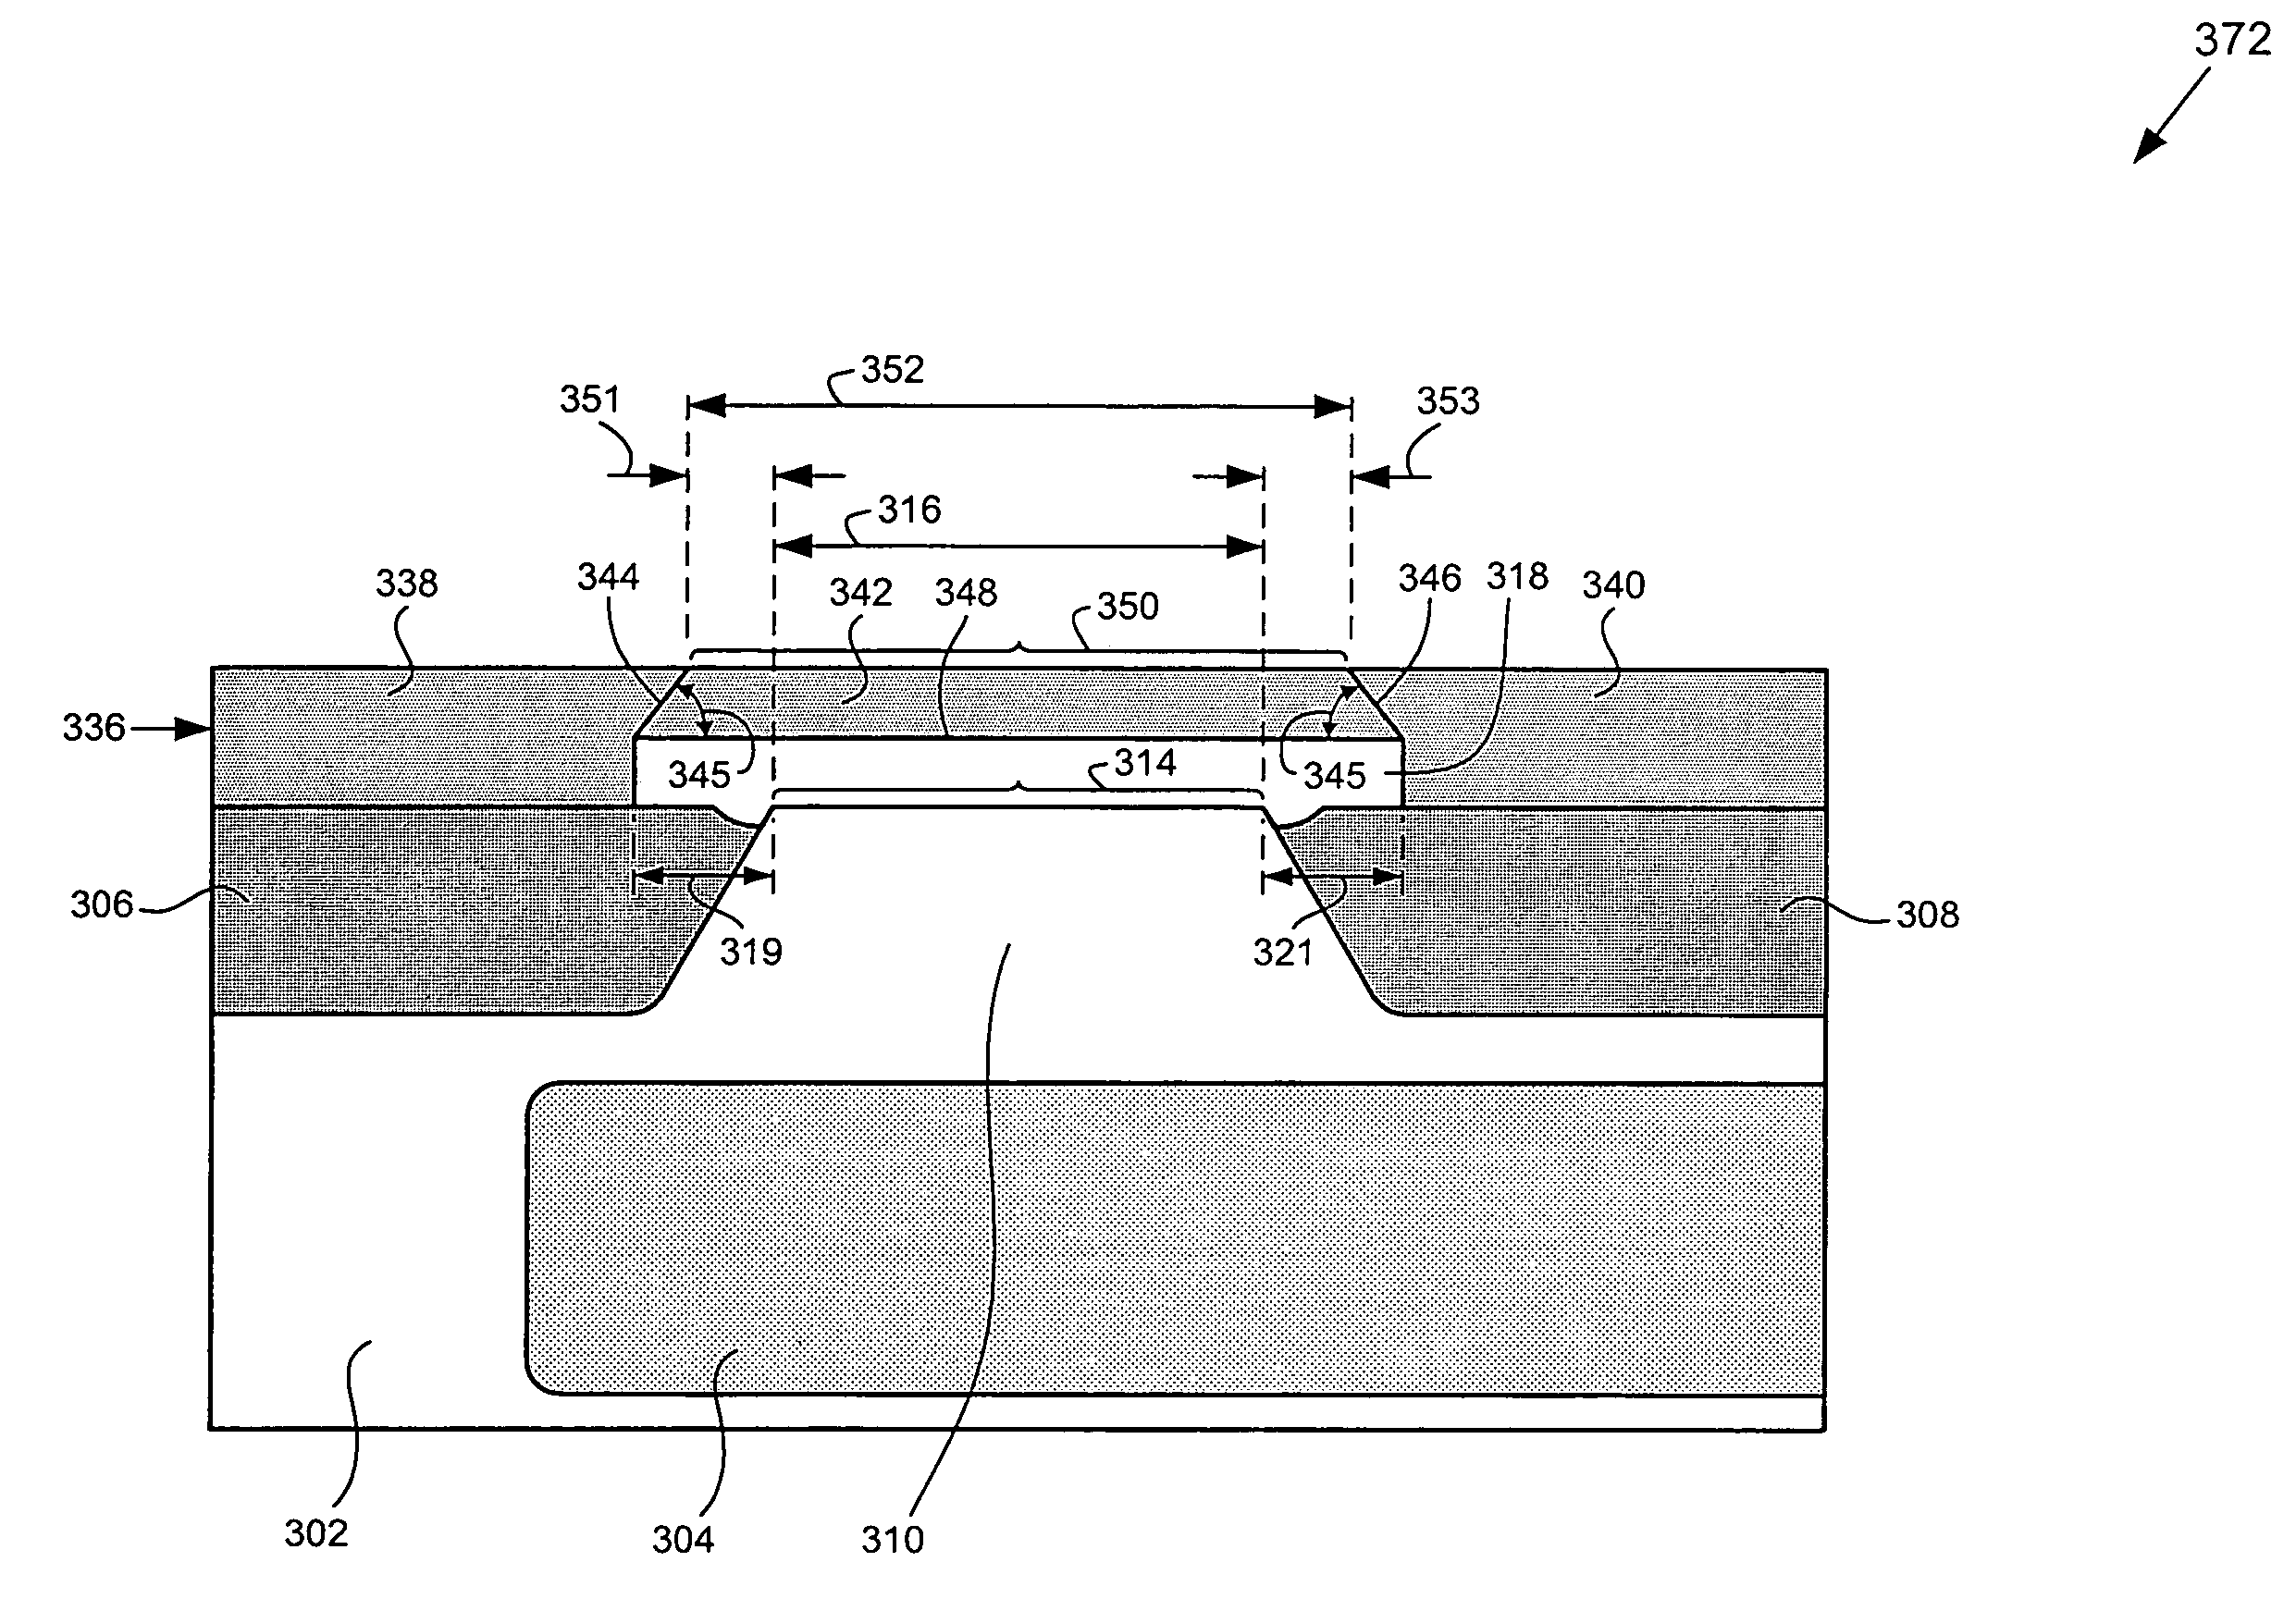 Bipolar transistor formed using selective and non-selective epitaxy for base integration in a BiCMOS process